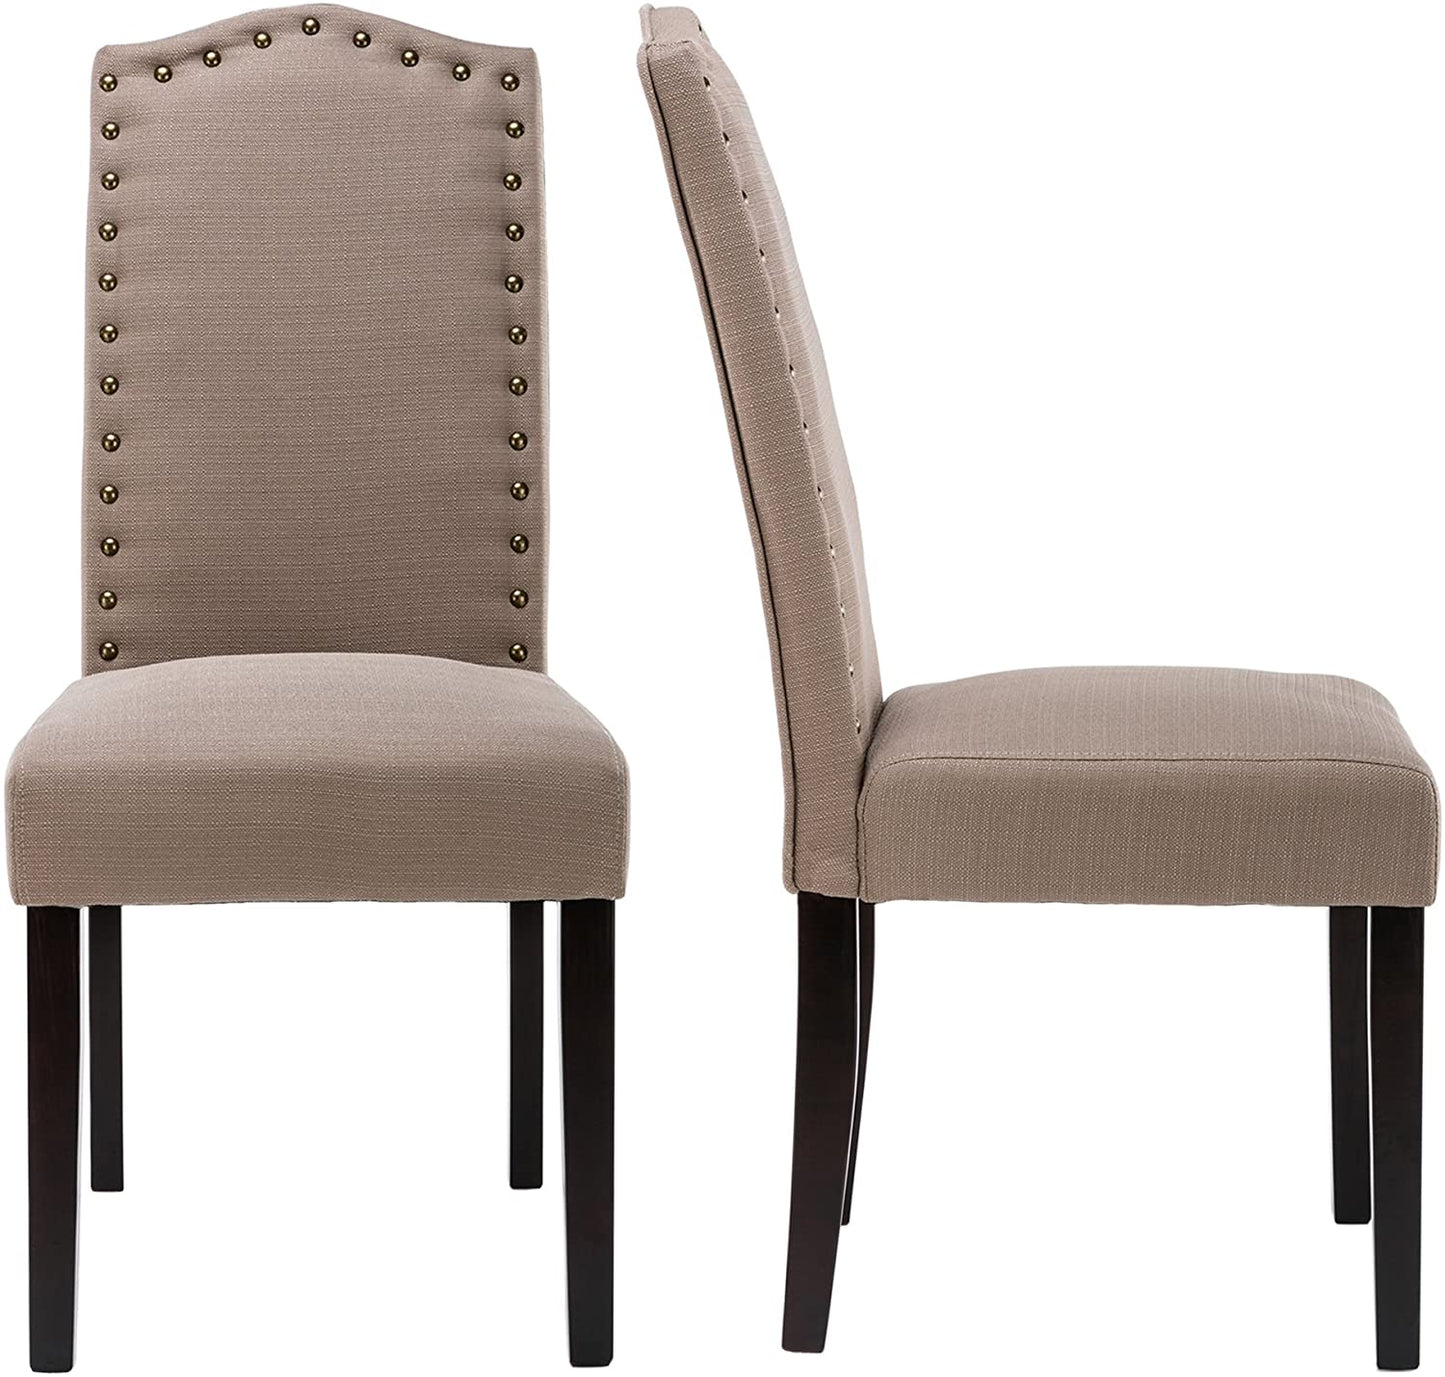 Set of 2 Luxurious Fabric Dining Chairs with Copper Nails and Solid Wood Legs (Light Gray)